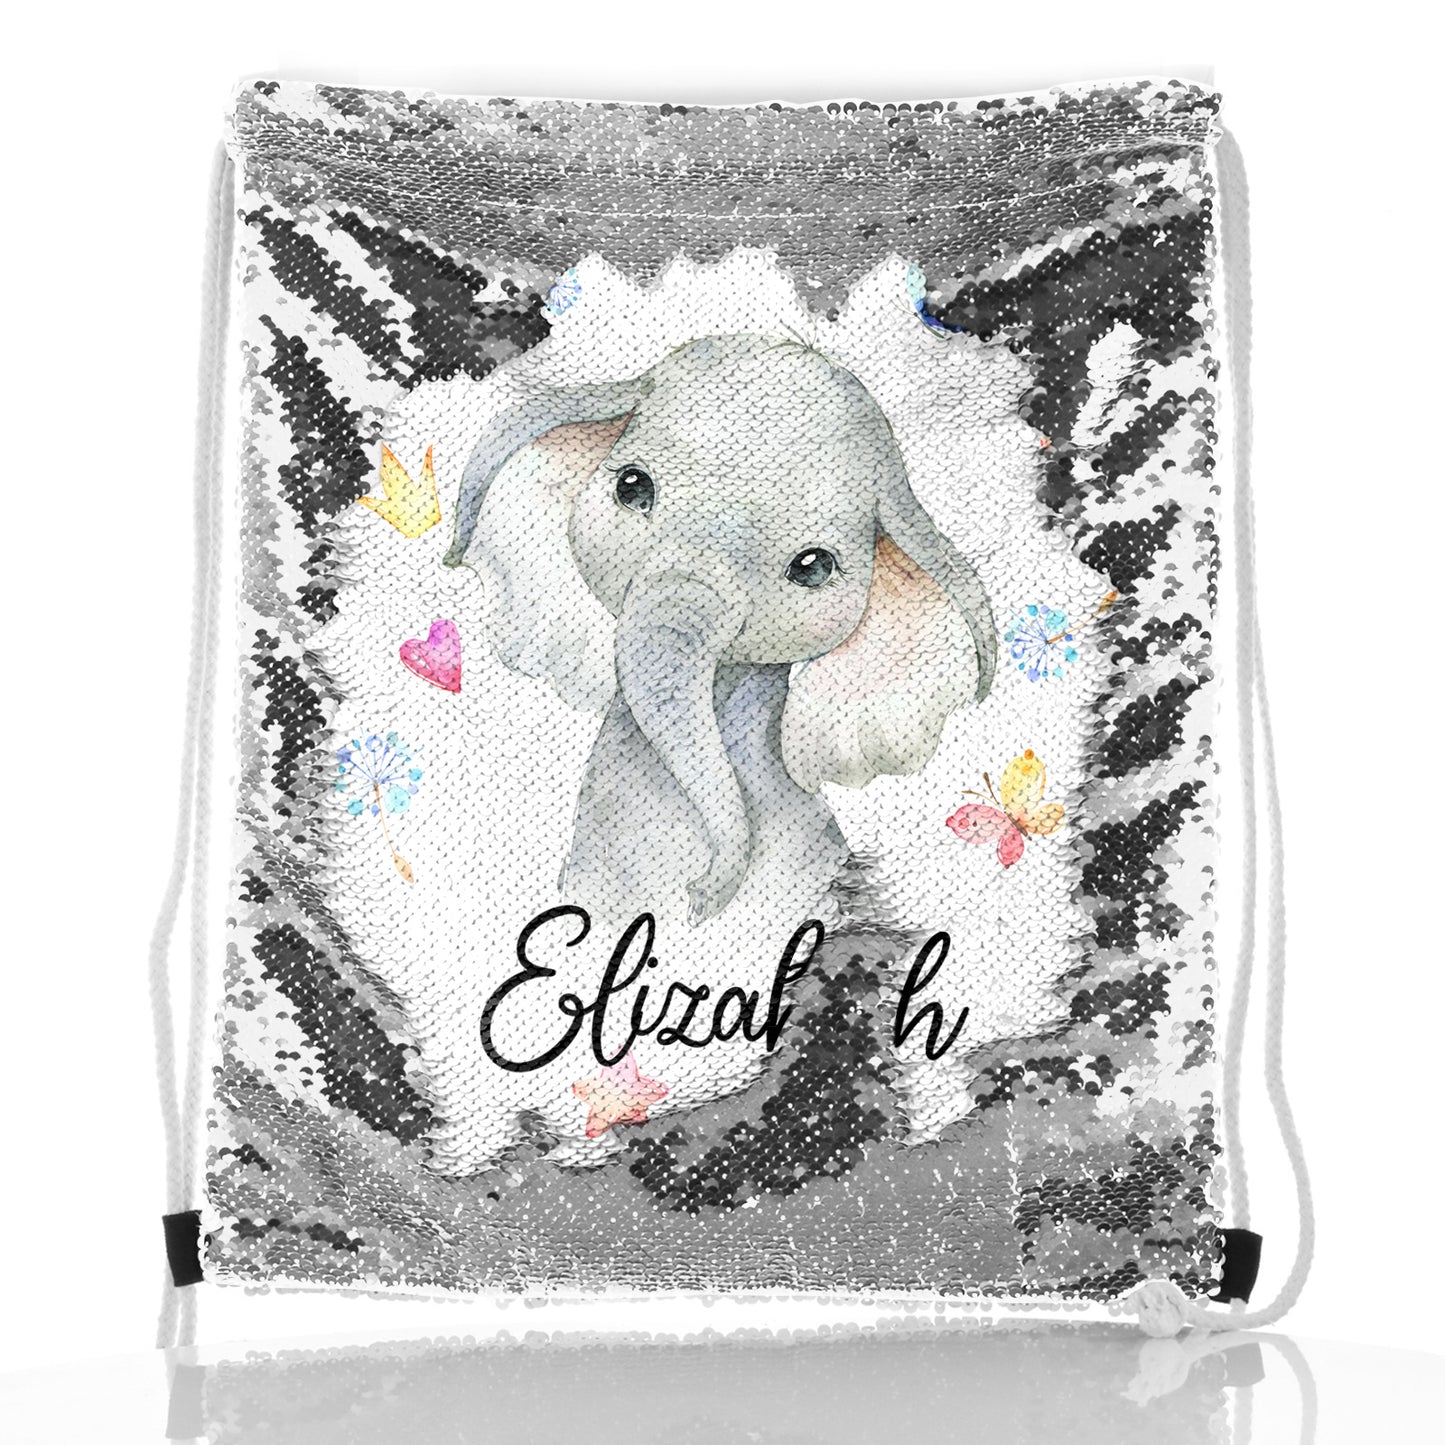 Personalised Sequin Drawstring Backpack with Grey Elephant with Hearts Stars Crowns Butterfly and Cute Text